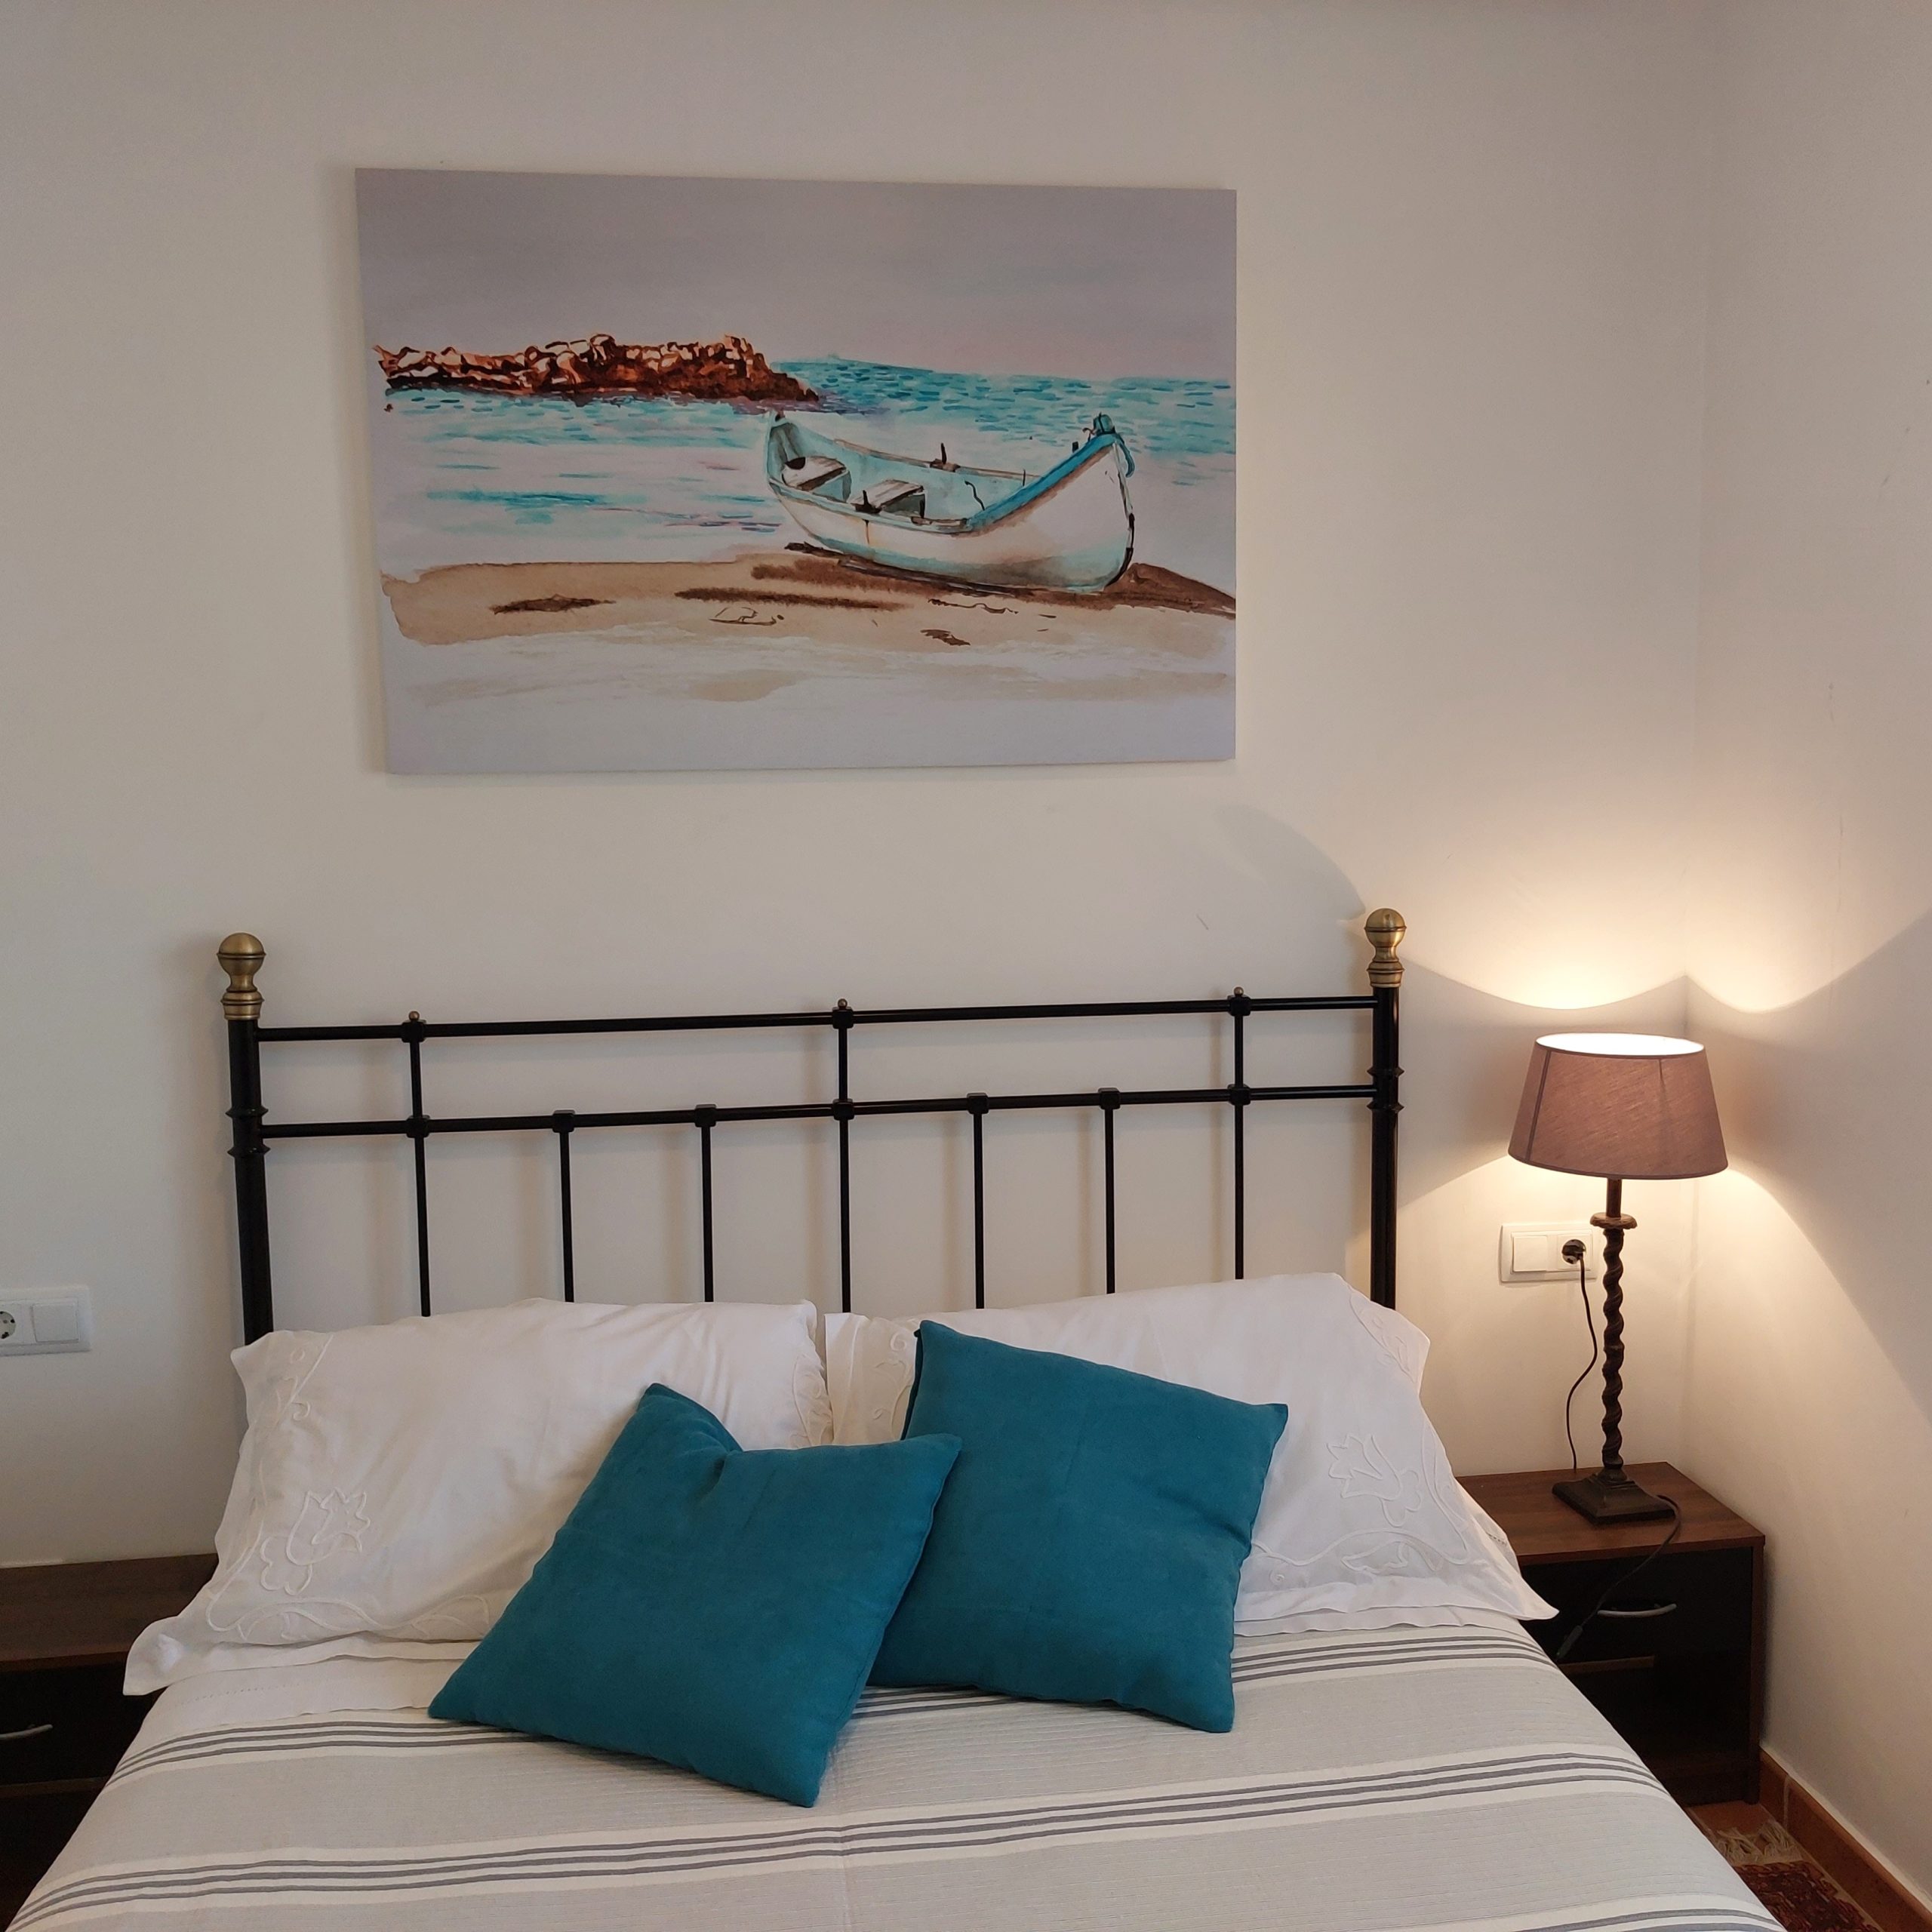 aparment-for-rent-in-murcia-bedroom